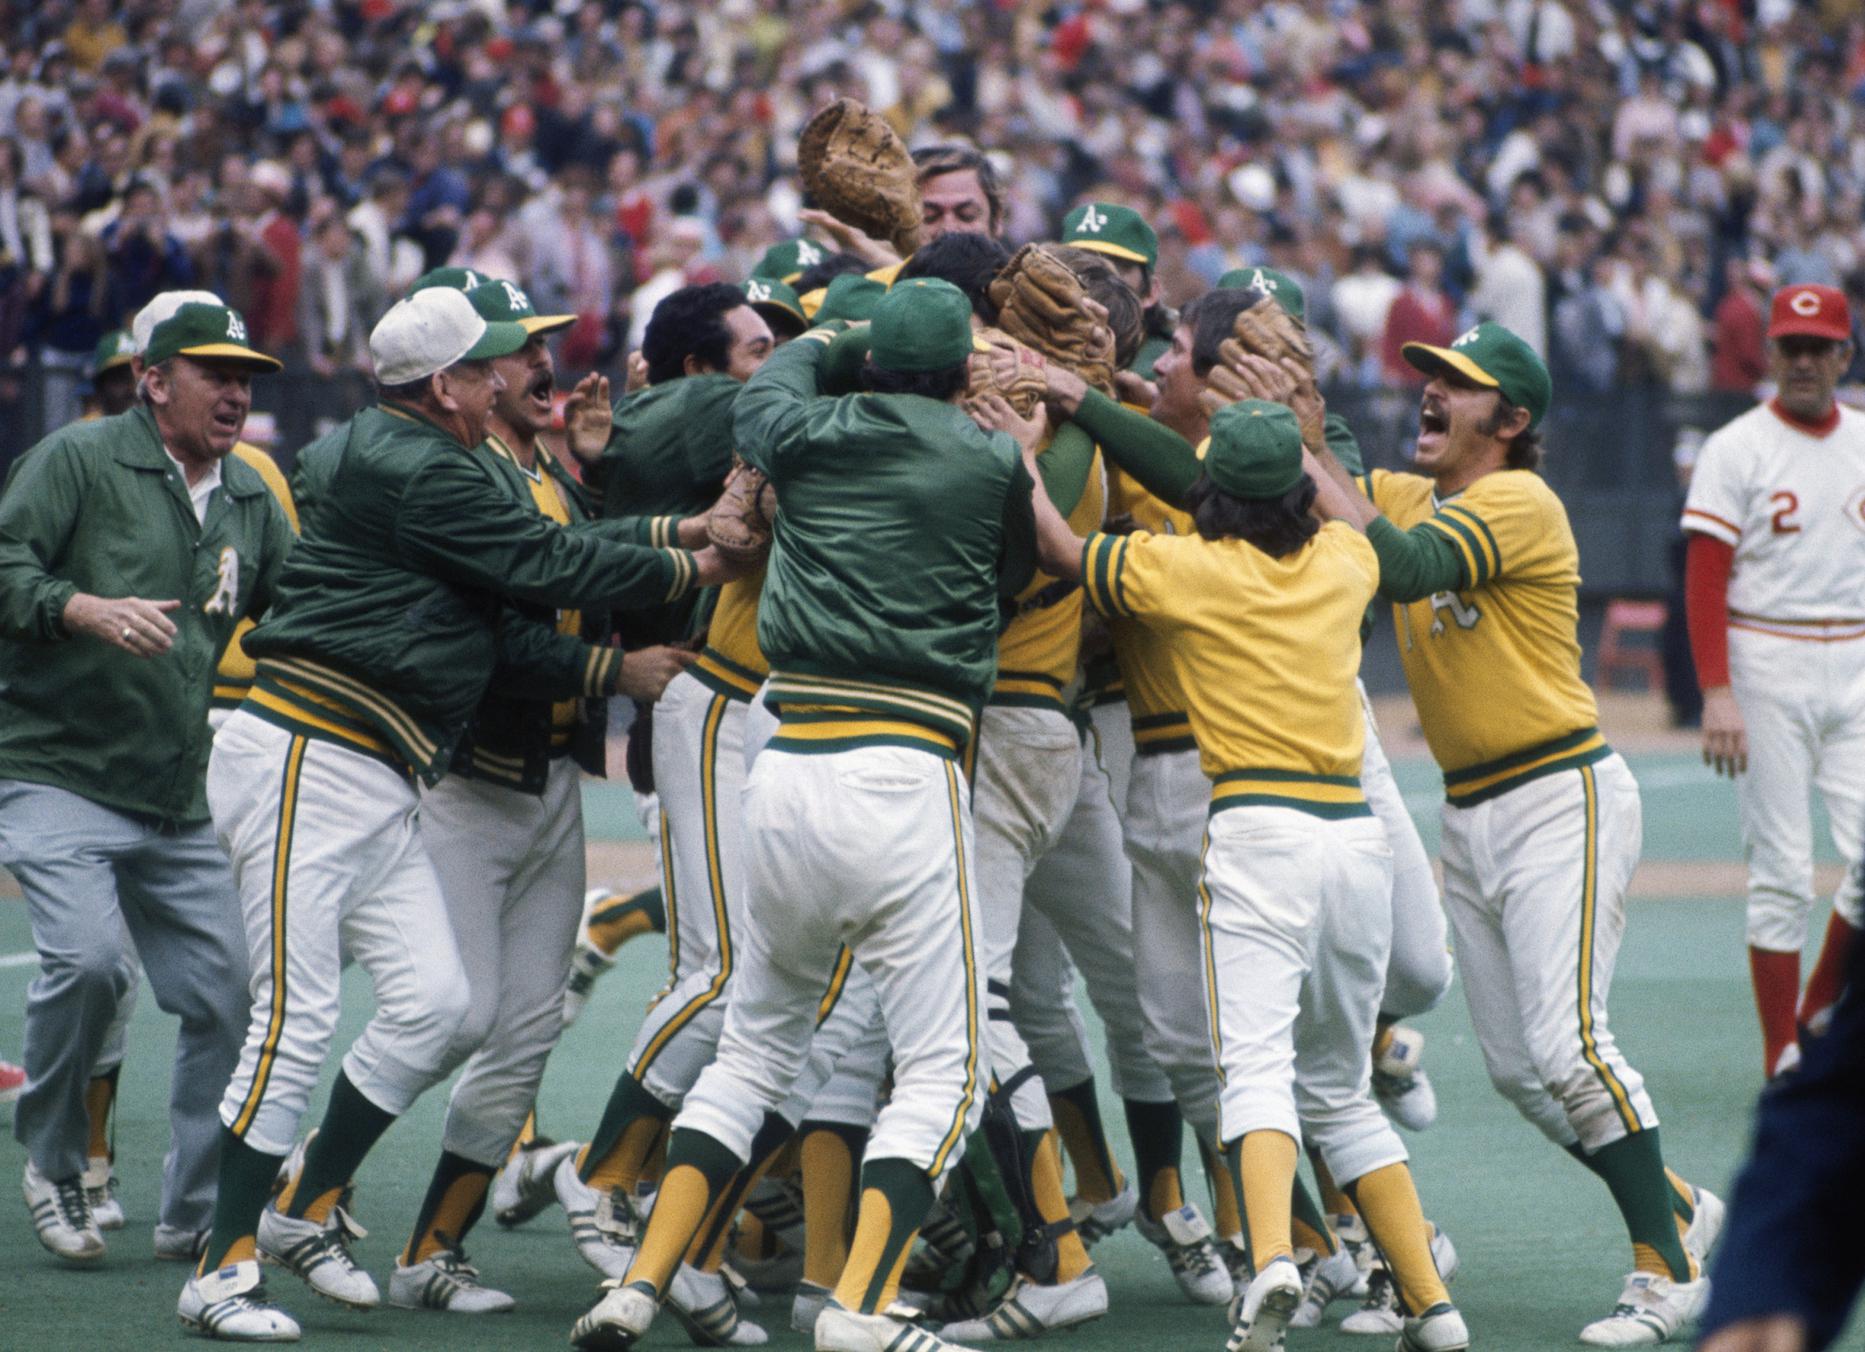 In 1972, the Athletics launched a dynasty